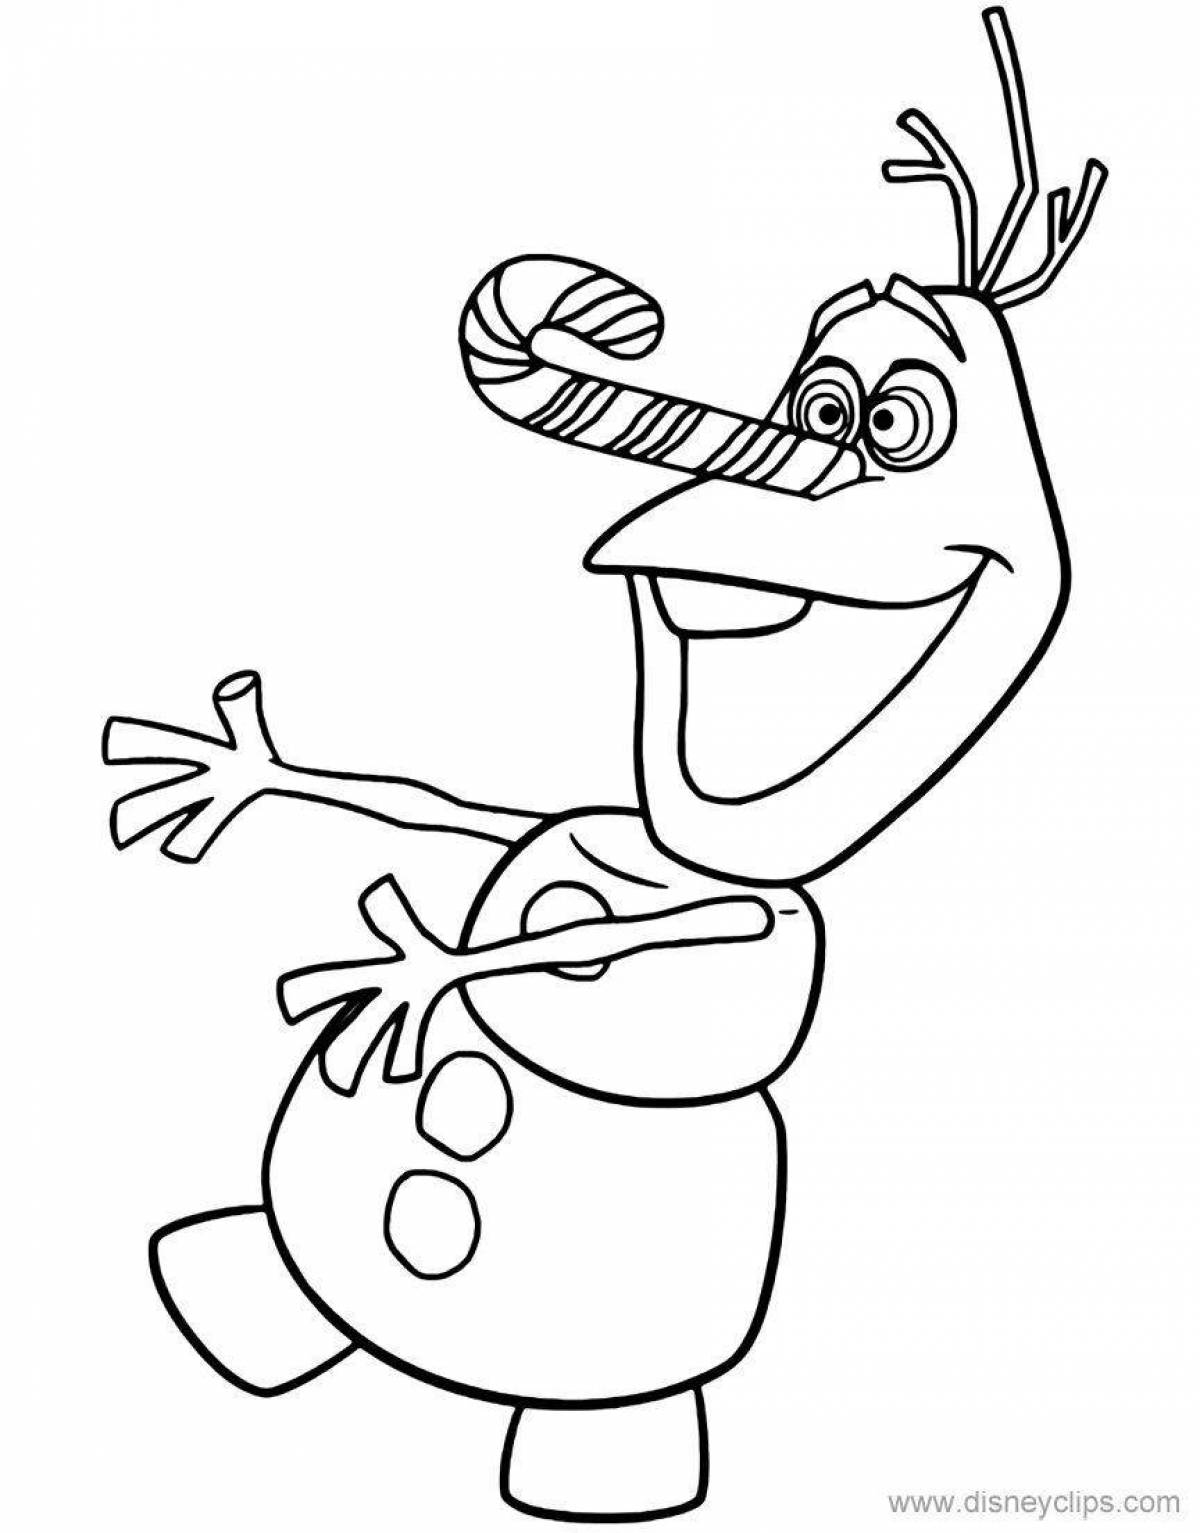 Olaf's amazing coloring book for kids